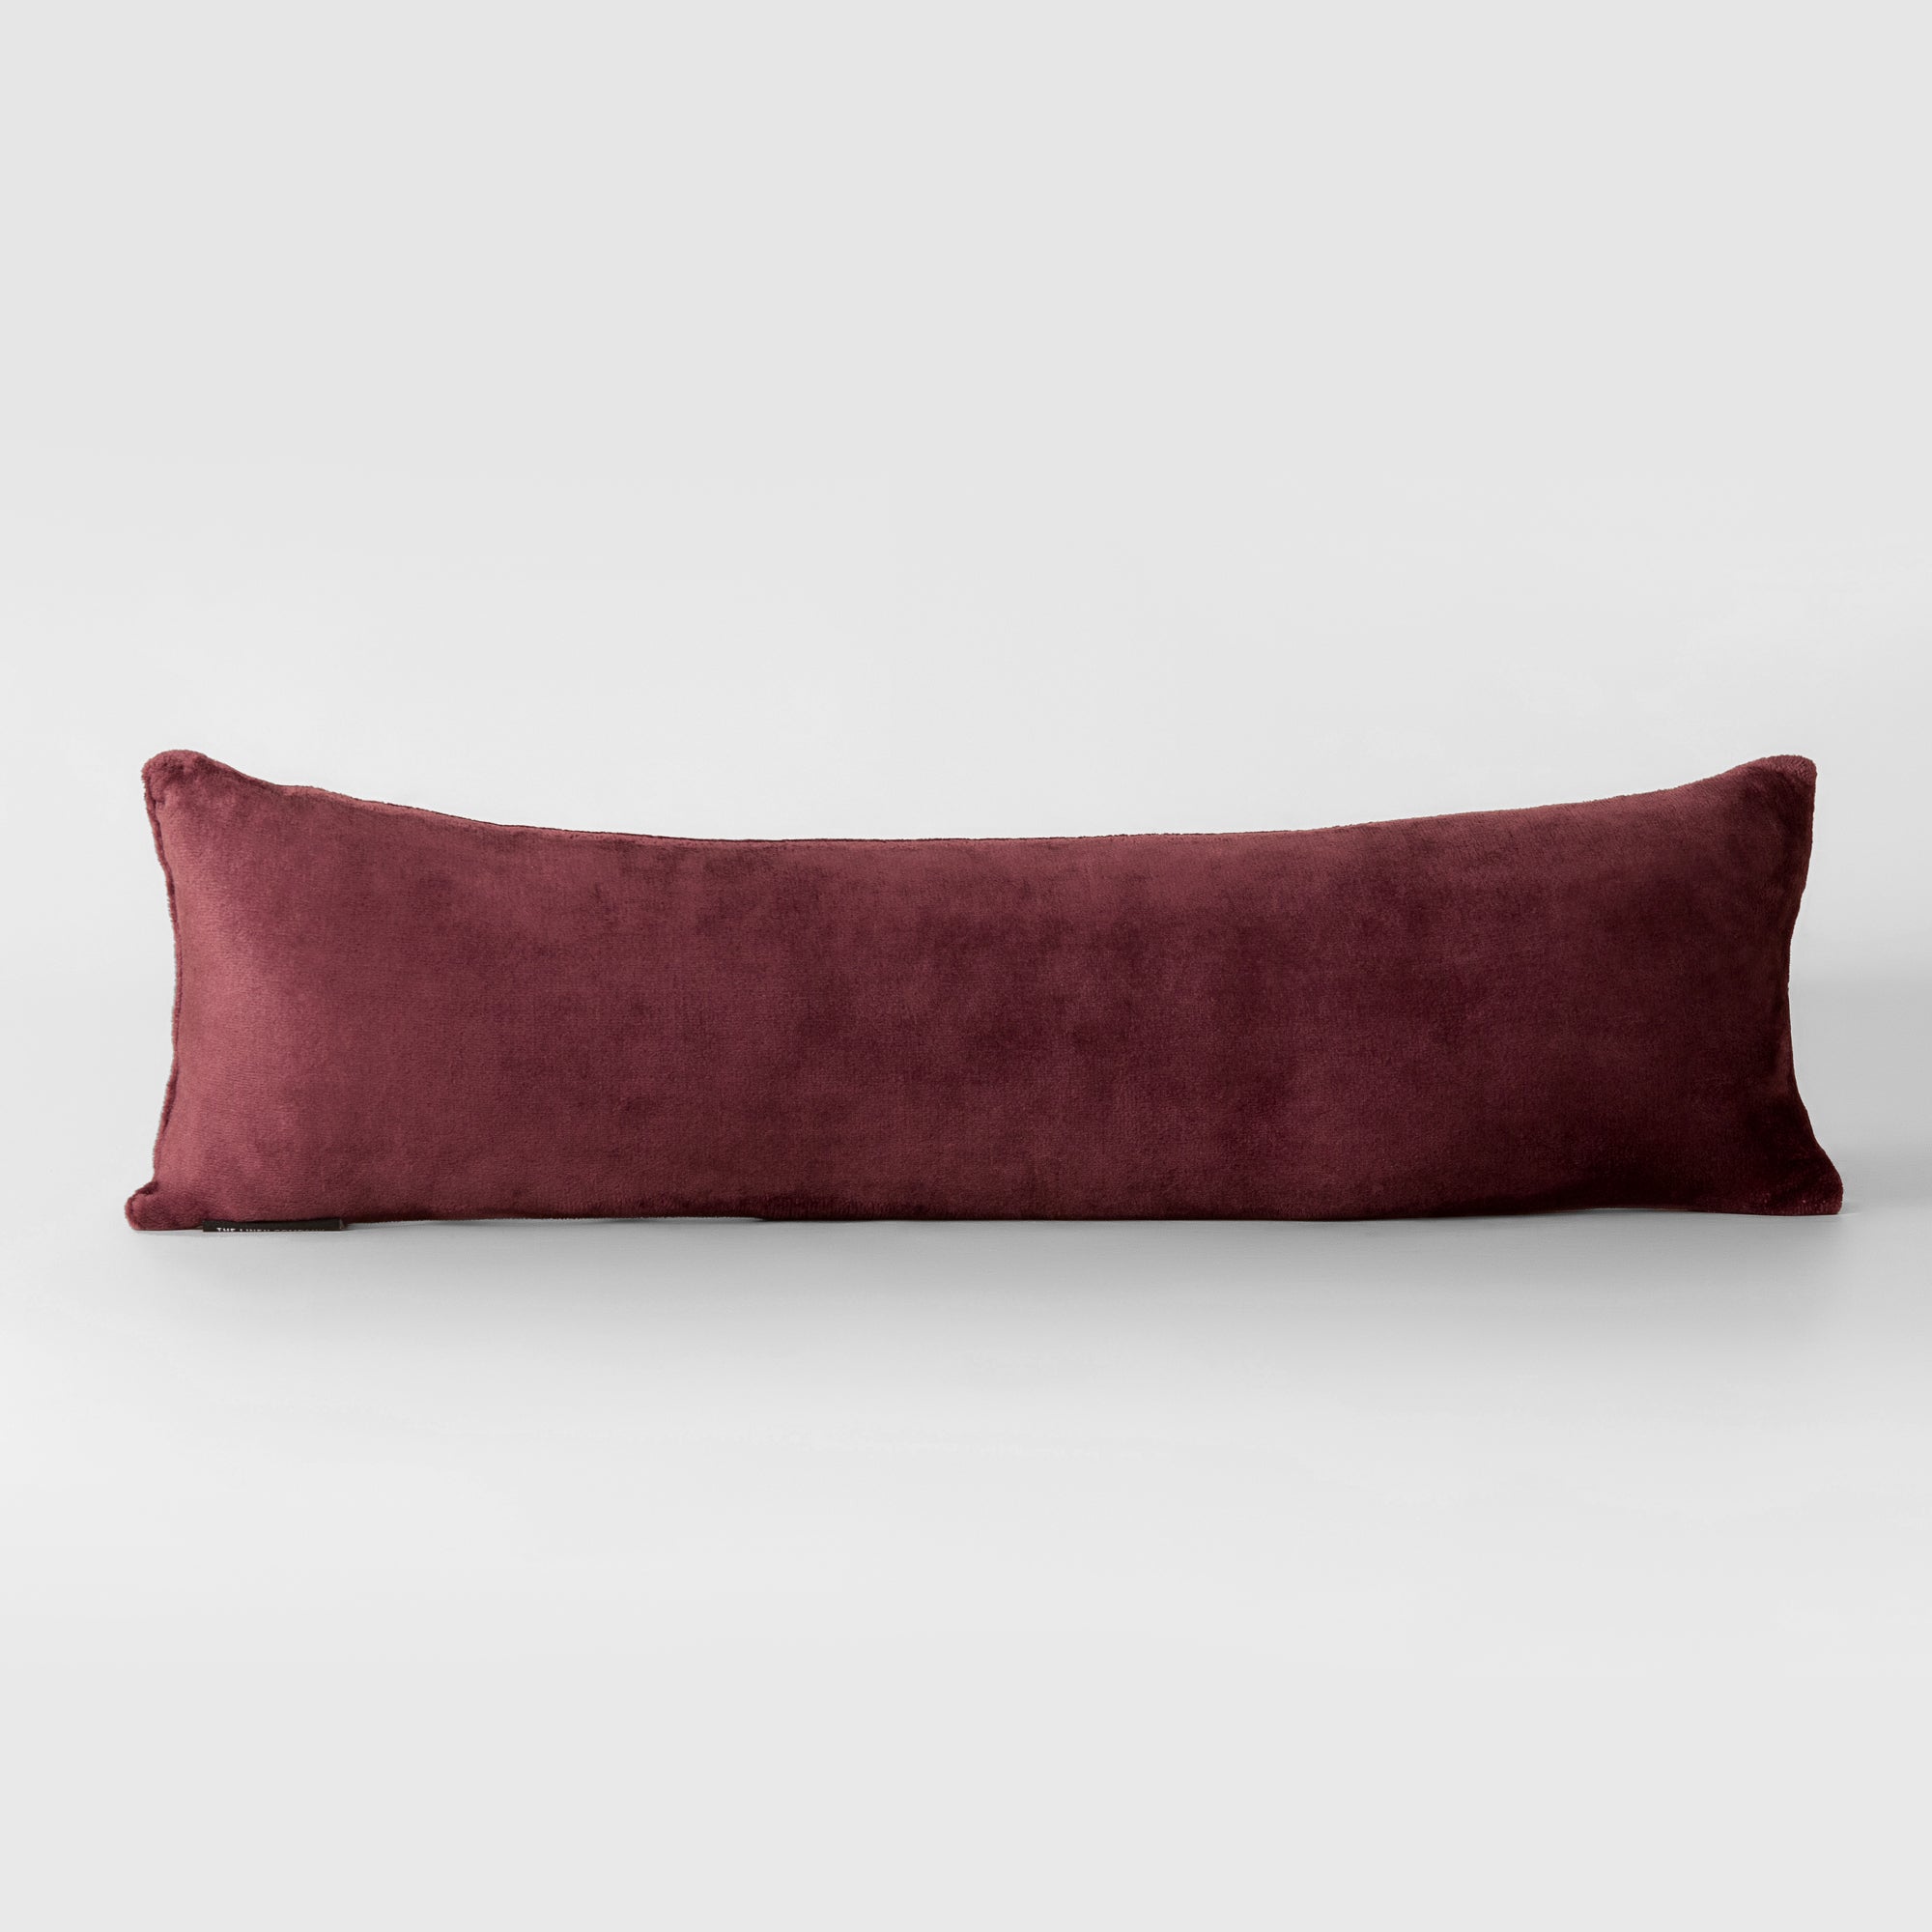 The Linen Company Accessories Accent Burgundy Plush Cushion